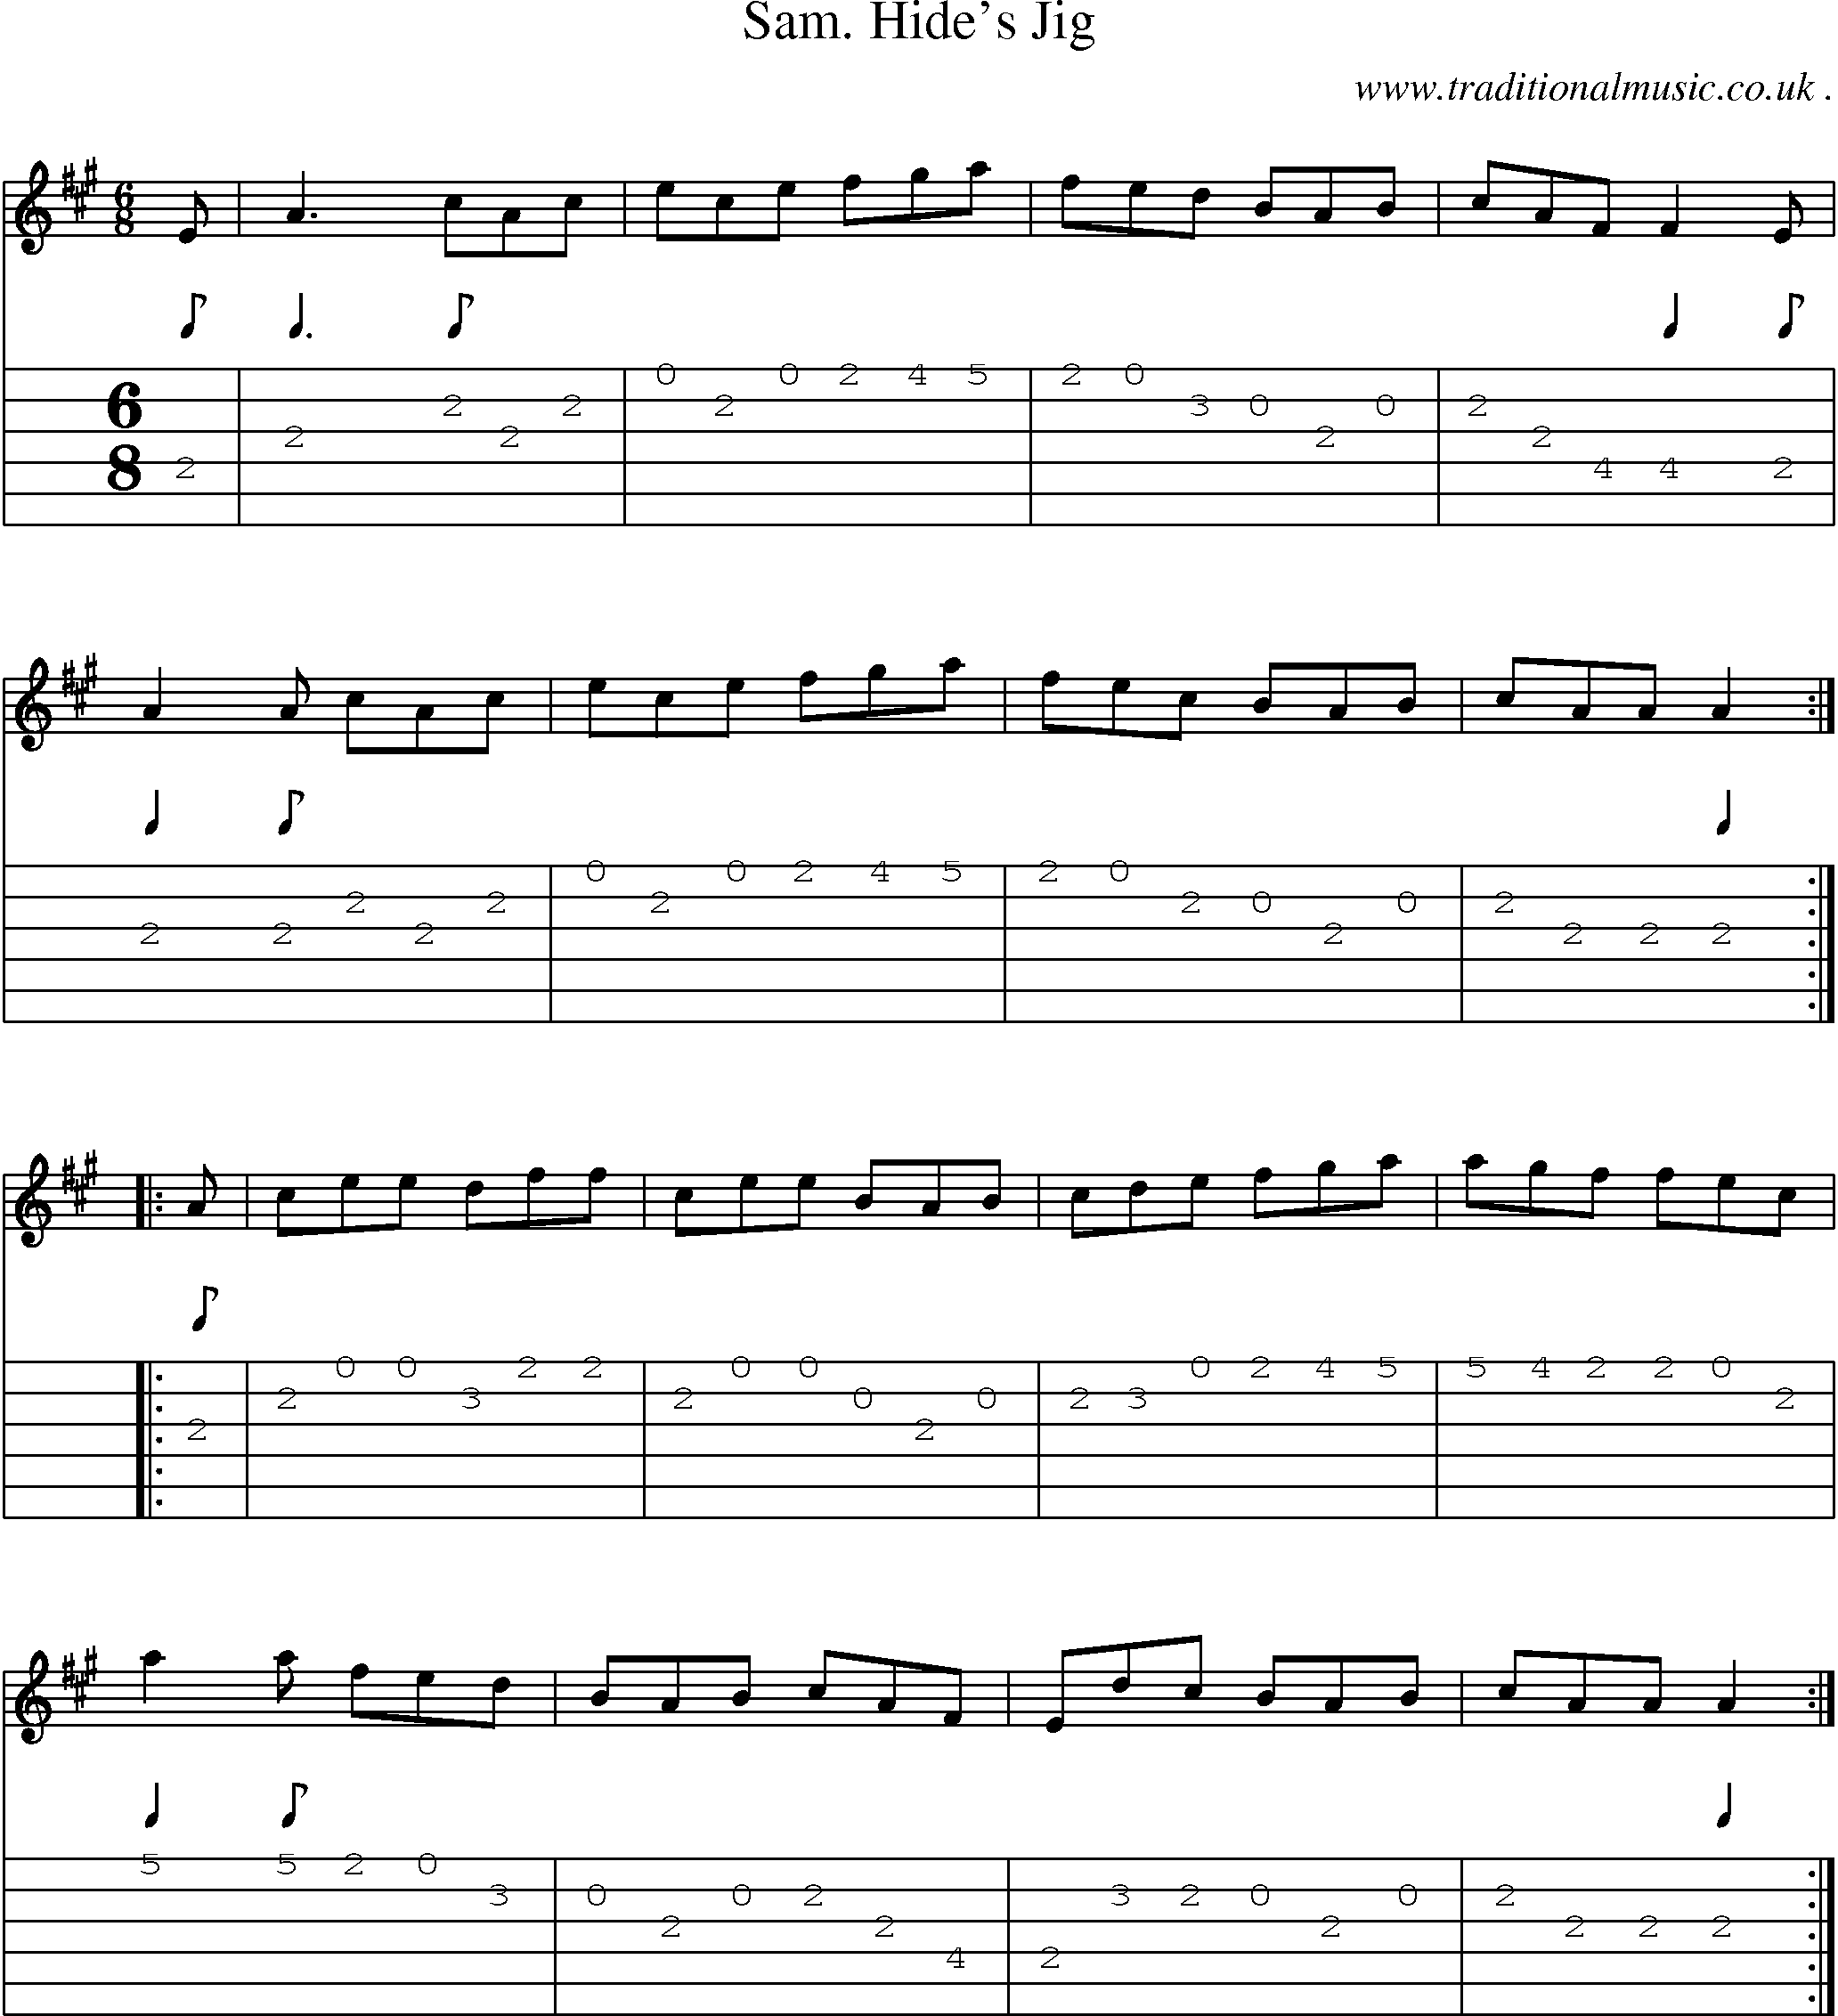 Sheet-Music and Guitar Tabs for Sam Hides Jig